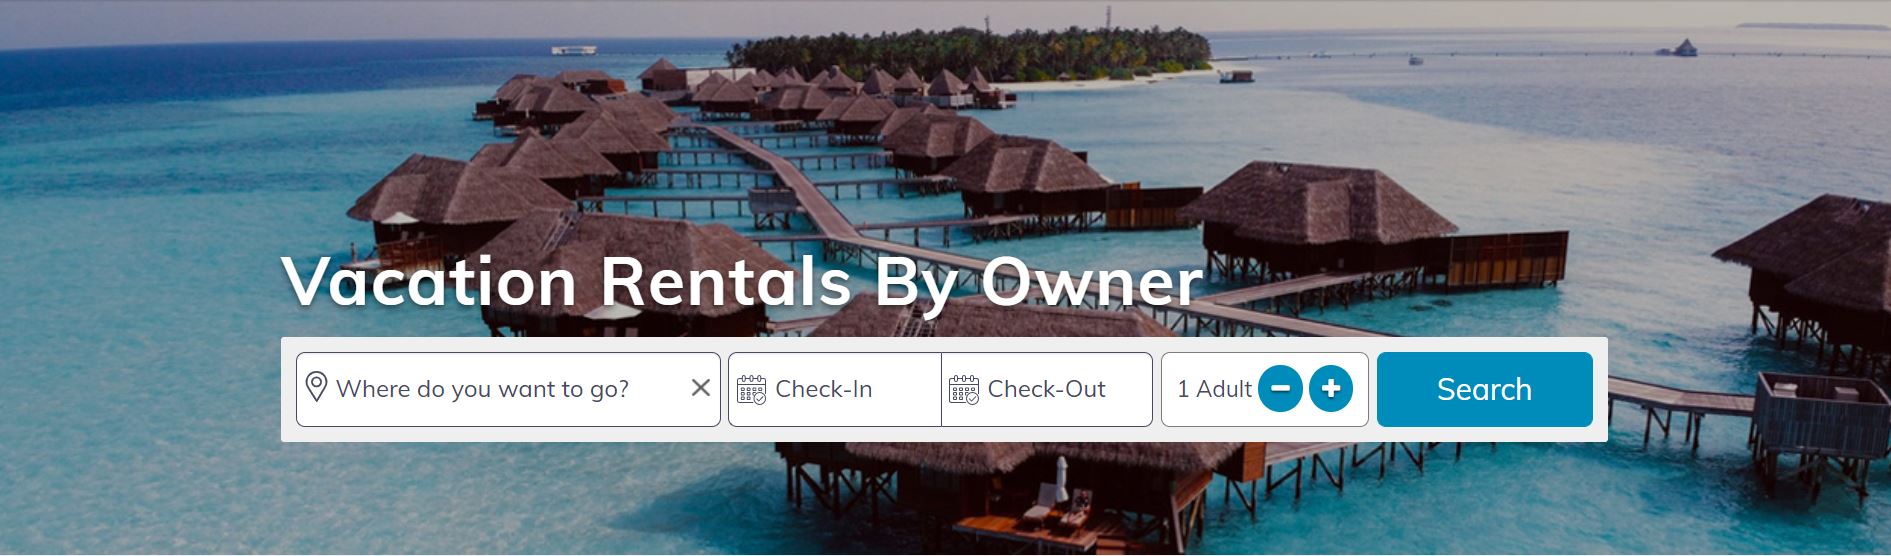 Top 10 Vacation Rental Websites - Vacation Rentals By Owner | Rent By Host